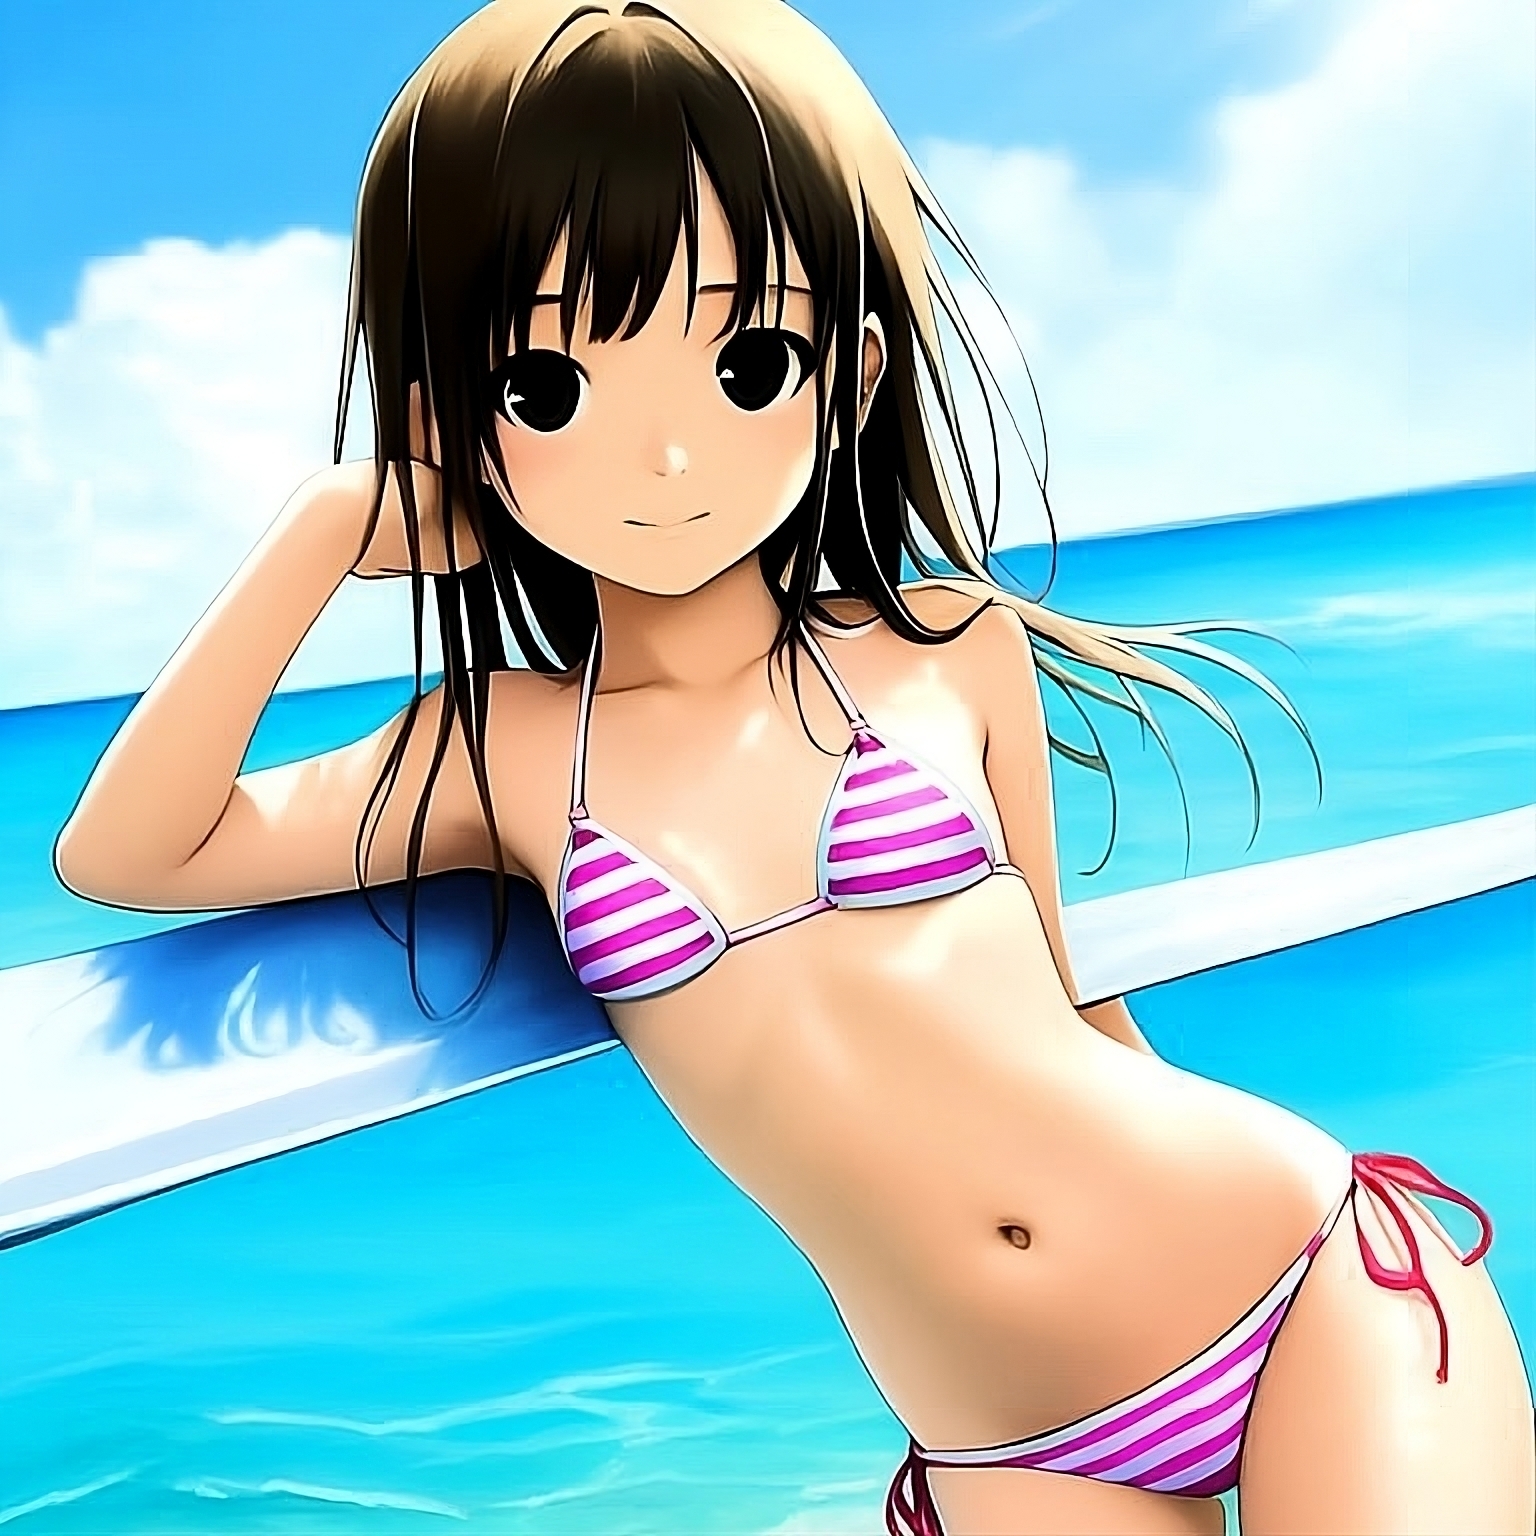 A young girl in a striped bikini by quincyjazimar13 on DeviantArt